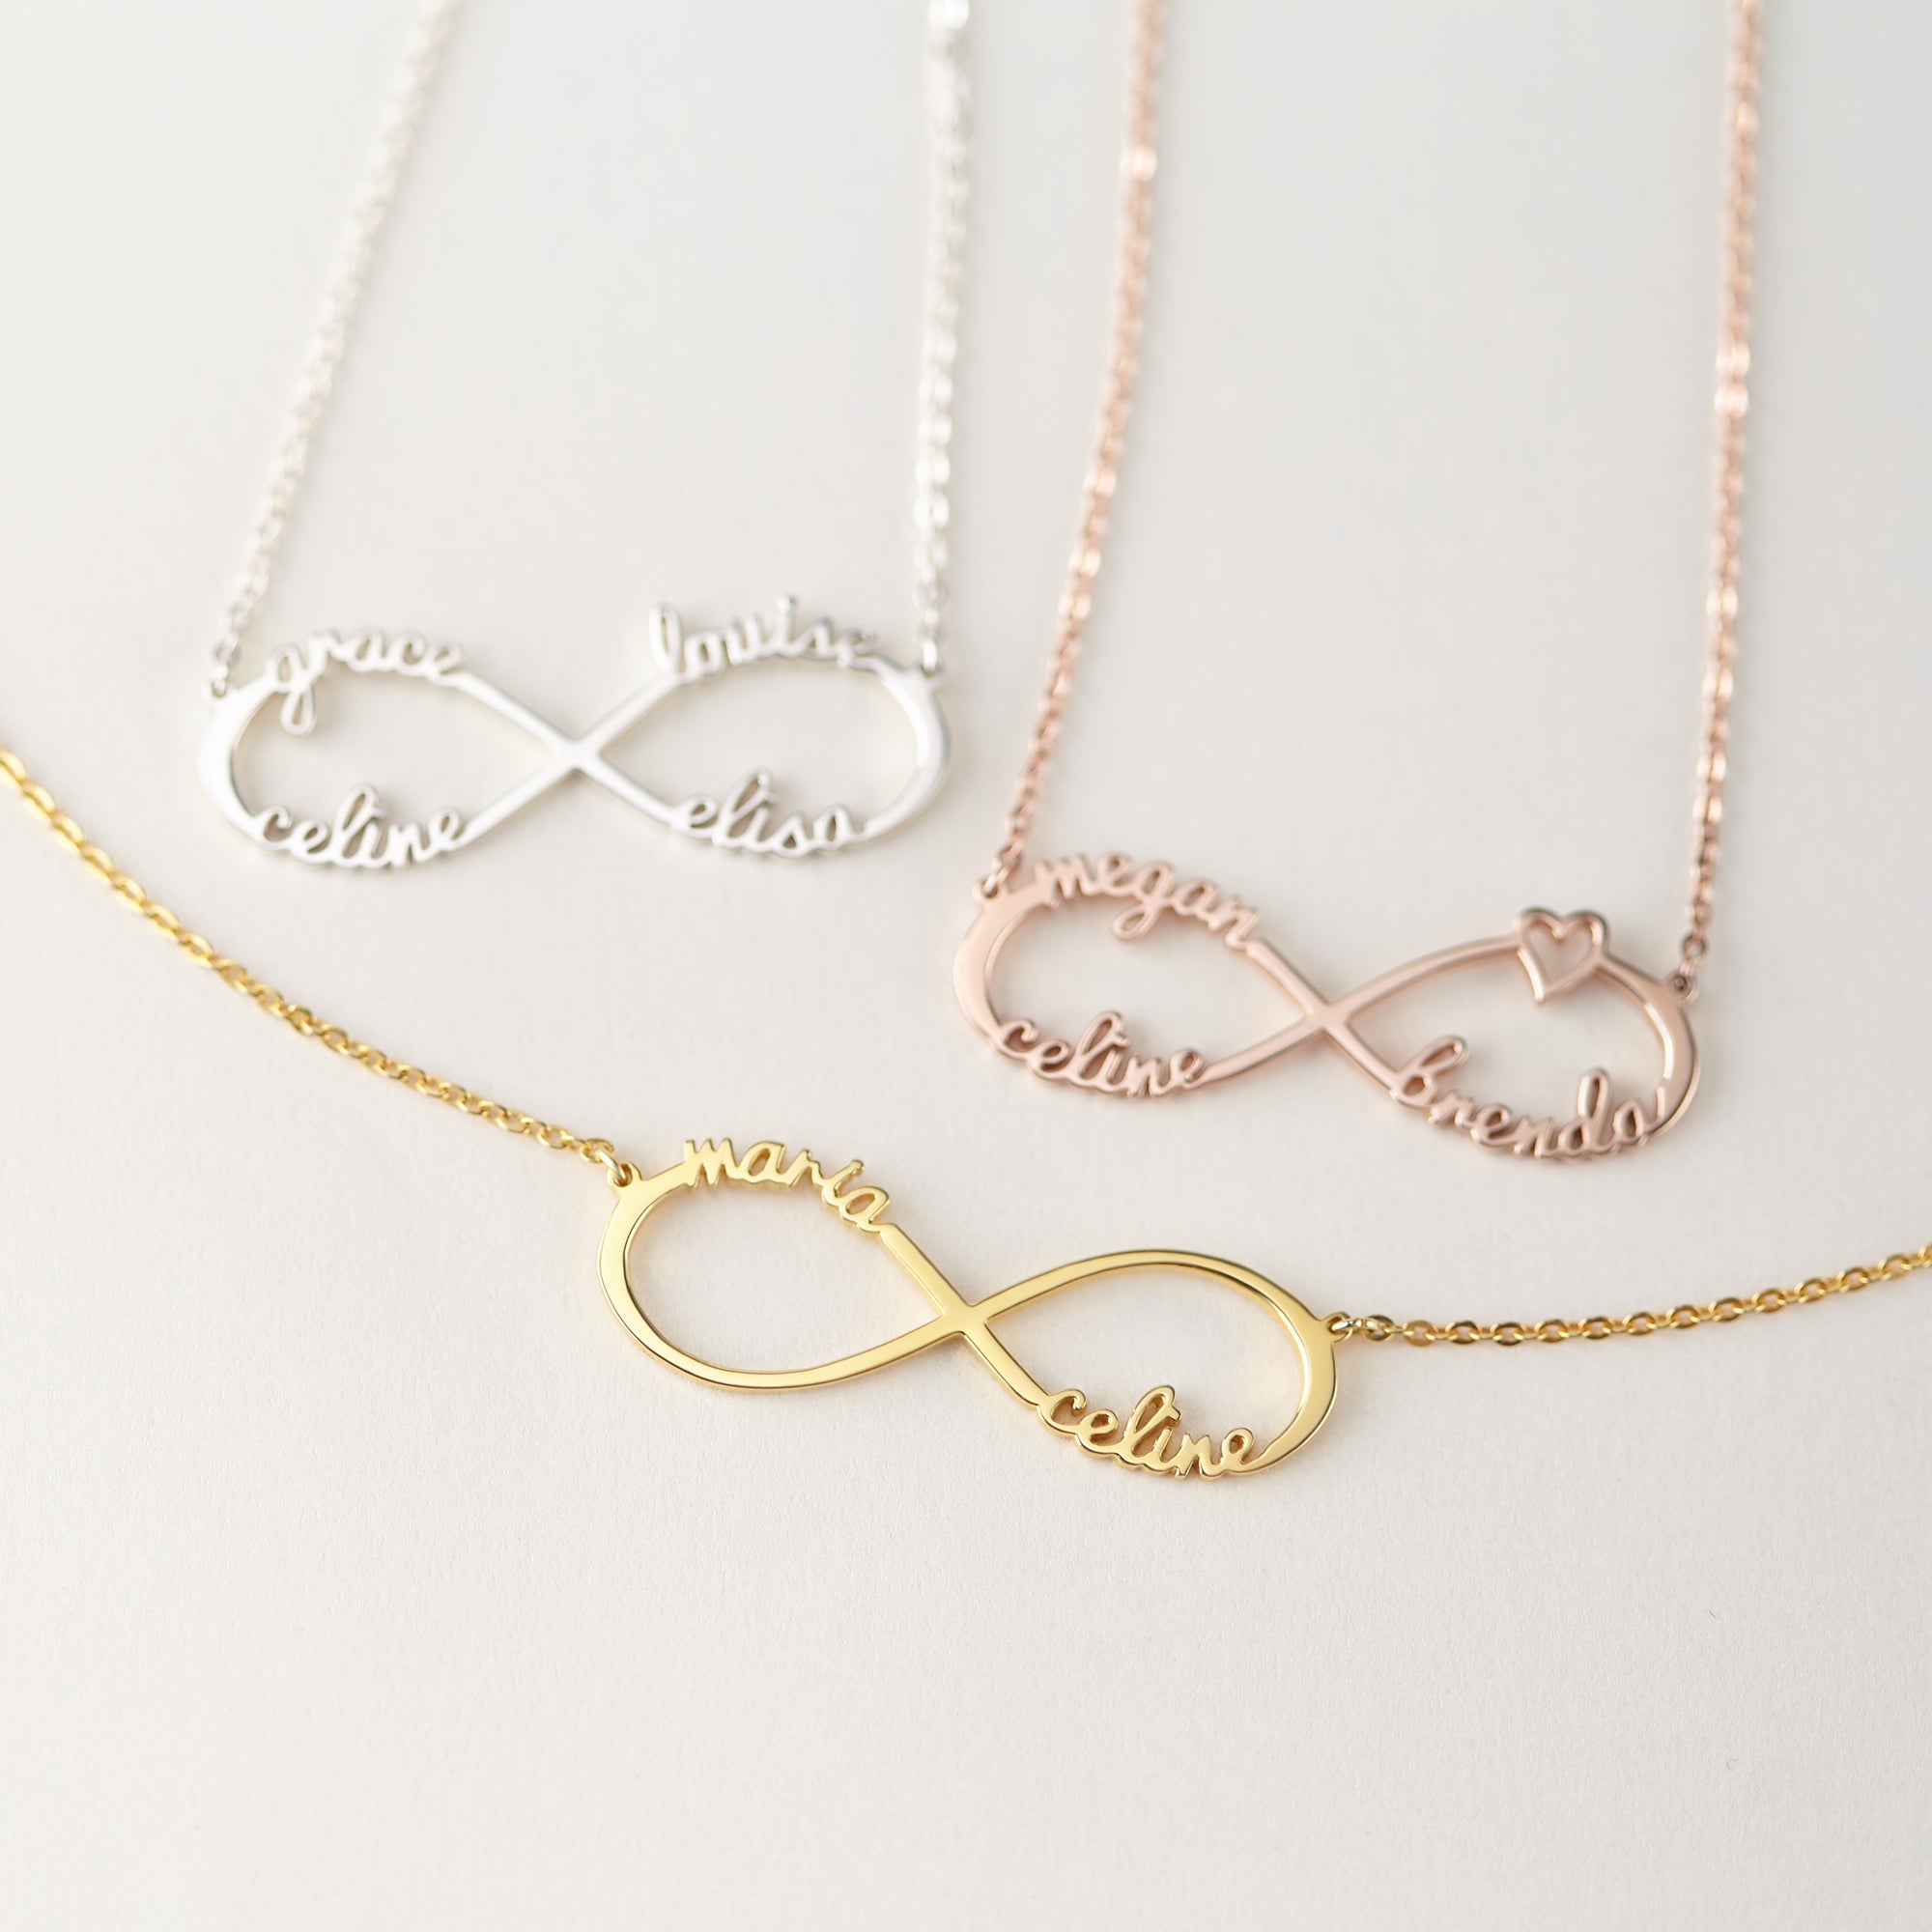 Personalized Infinity Family Name Necklace - 925 Sterling Silver & 18K Gold Plated, Gift for Mom, Grandma, Children, Christmas - Necklaces - Bijou Her -  -  - 